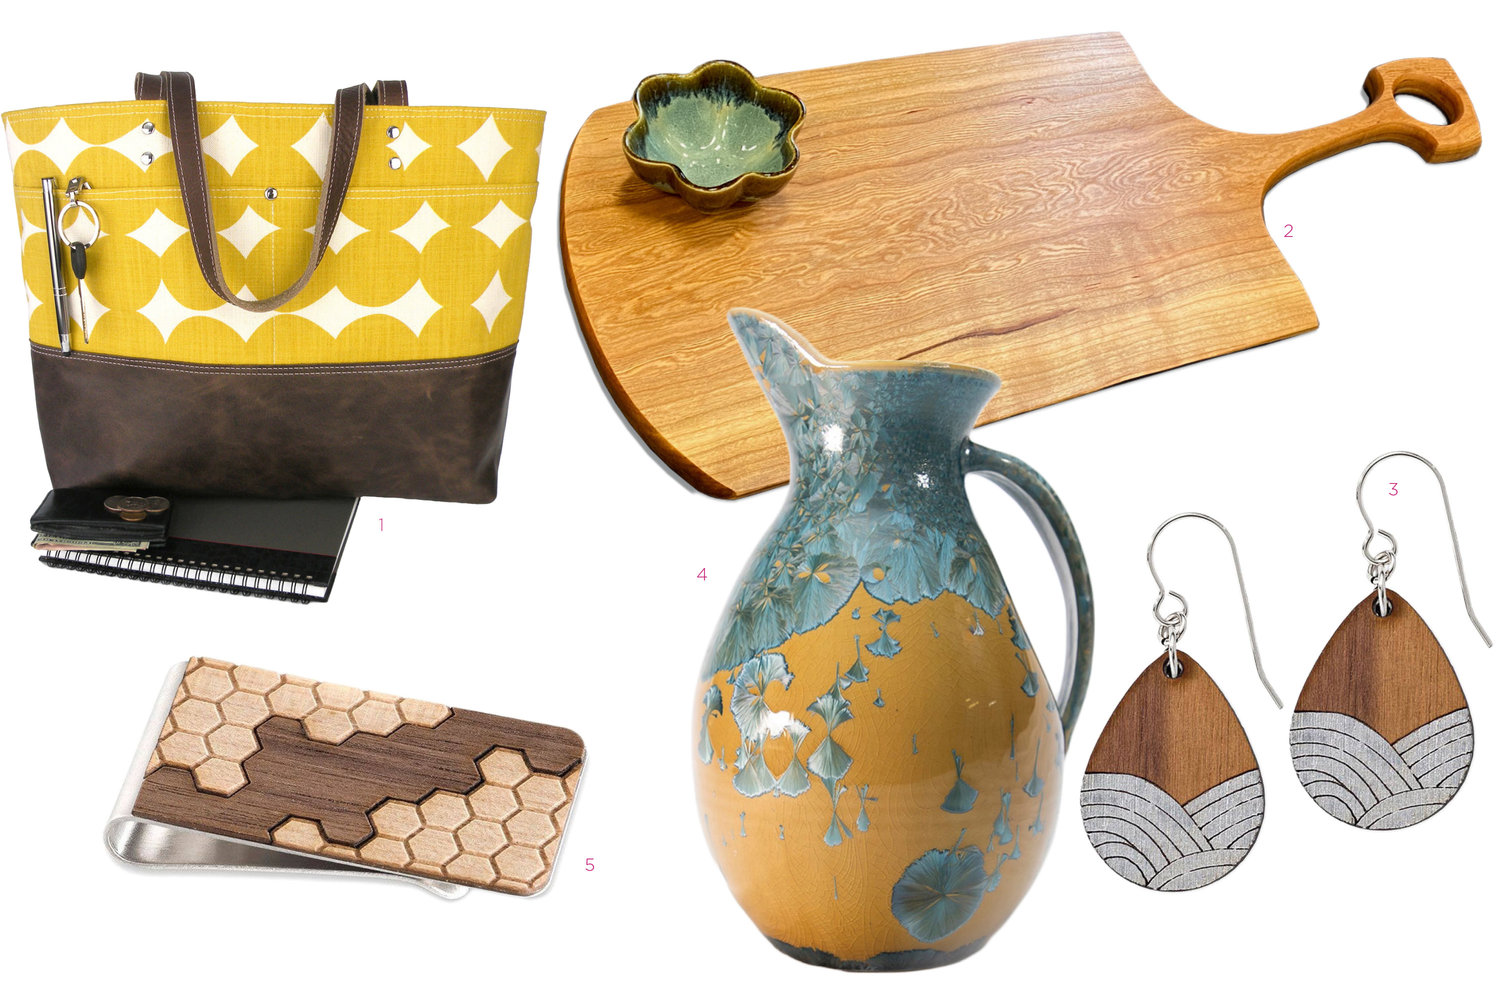 1. Carryall Tote, 2. Charcuterie Board, 3. Earrings, 4. Michael Chatterley Pitcher, 5. Money Clip